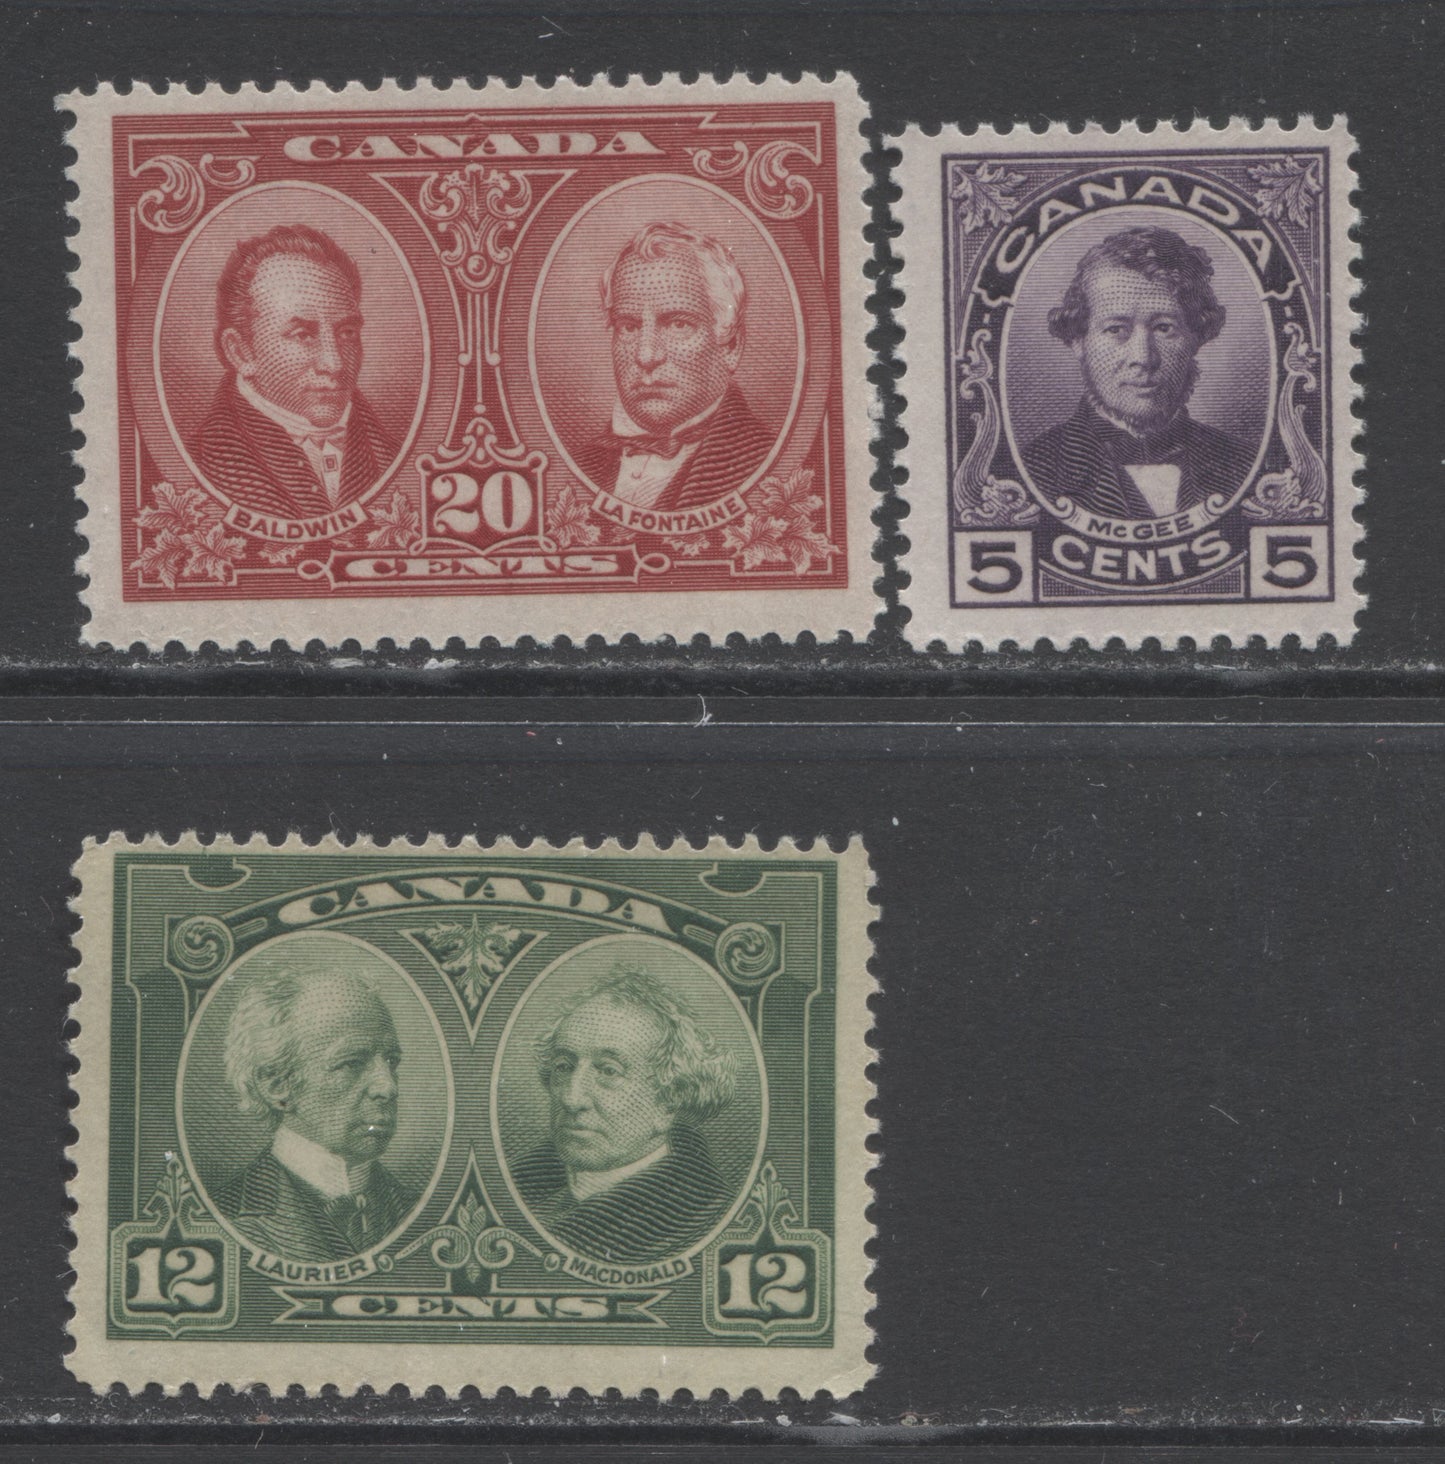 Lot 106 Canada #146-148 5c - 20c Violet - Brown Carmine Thomas D'Arcy McGee - Baldwin & Lafontaine, 1927 Historical Issue, 3 FNH Singles